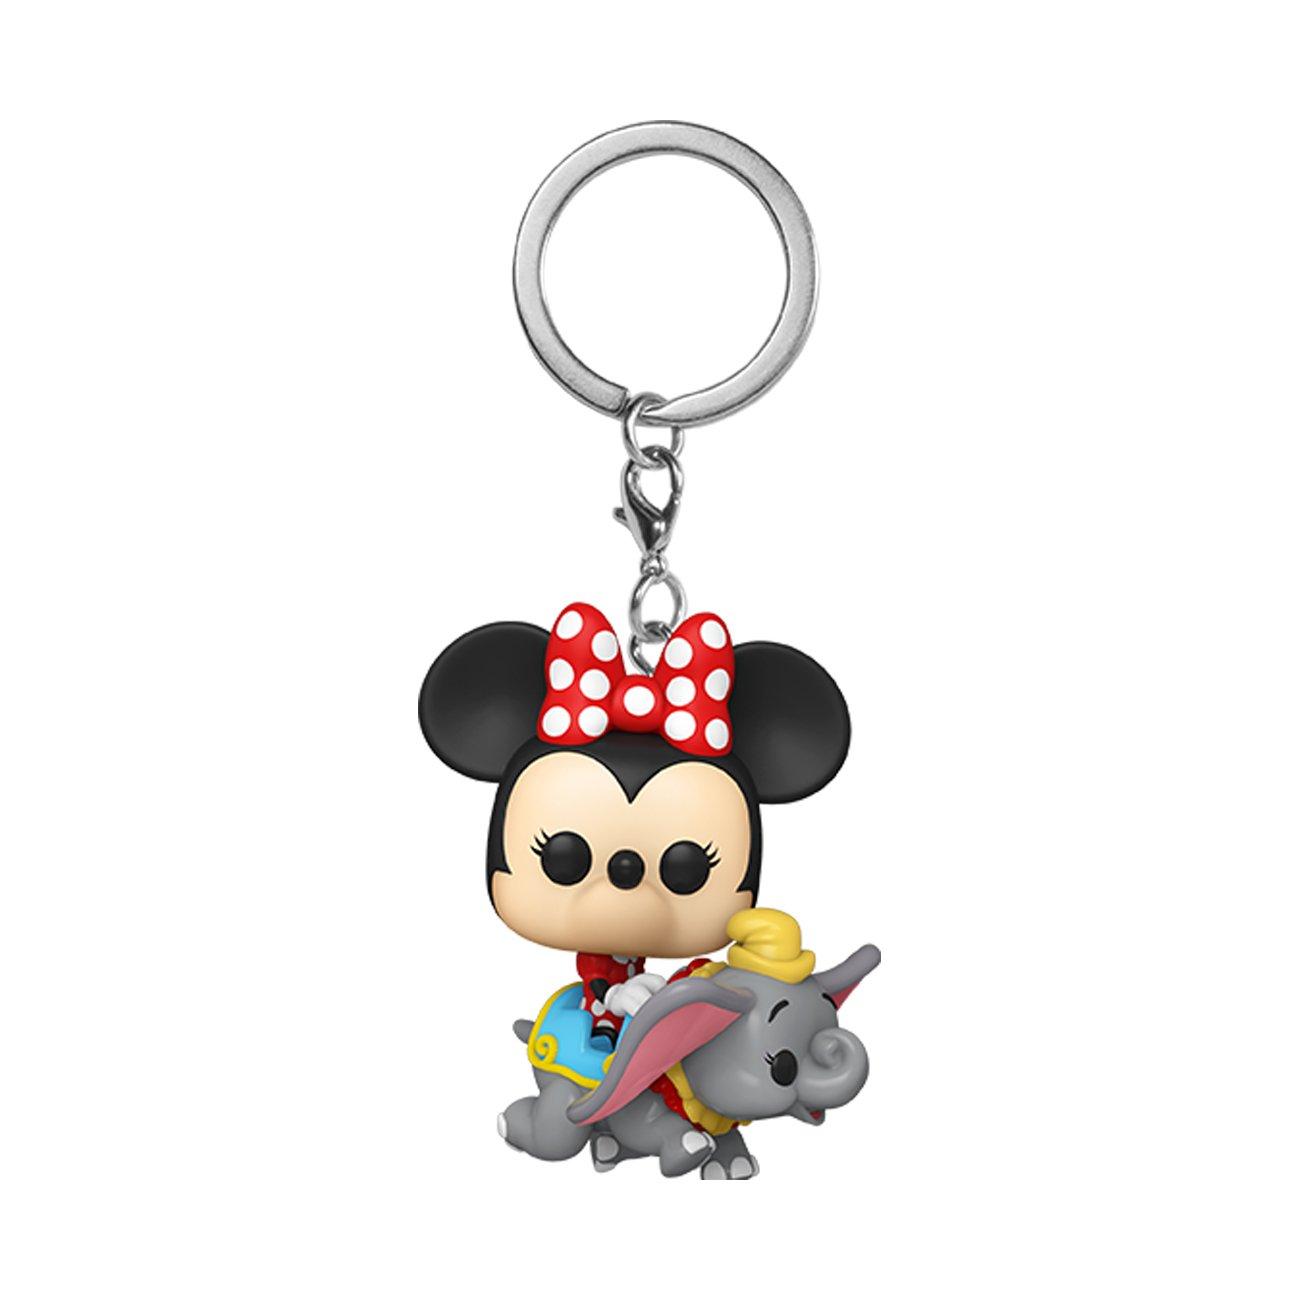 Pocket POP! Keychain: Disneyland Resort 65th Anniversary Dumbo the Flying Elephant and Minnie Mouse